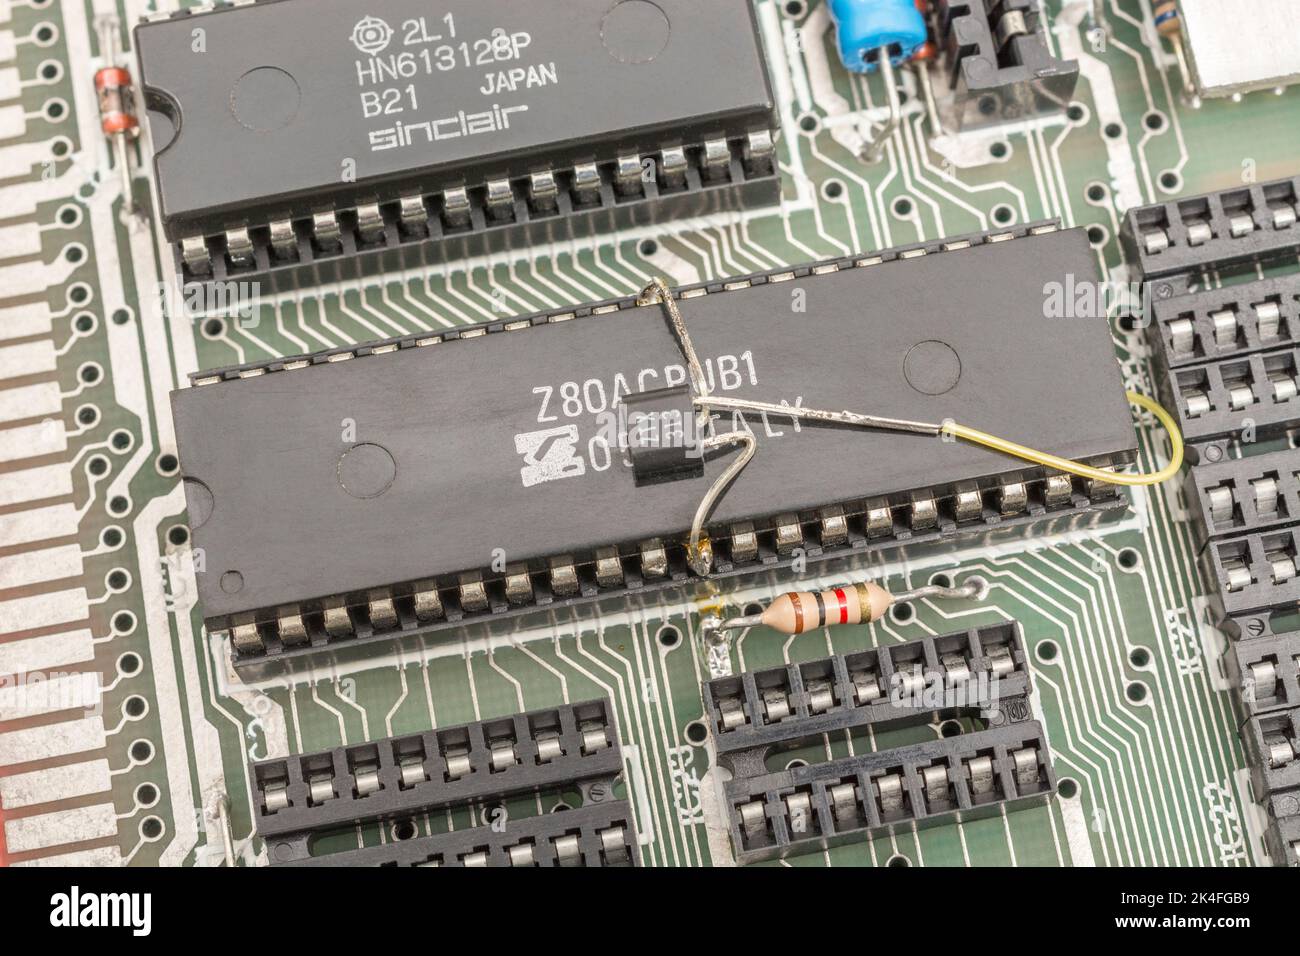 Retro computer (1982 Sinzlair ZX Spectrum) motherboard with legendary 40-pin Z80 CPU processor. For semiconductors, microchips, old 1980s computers. Stock Photo